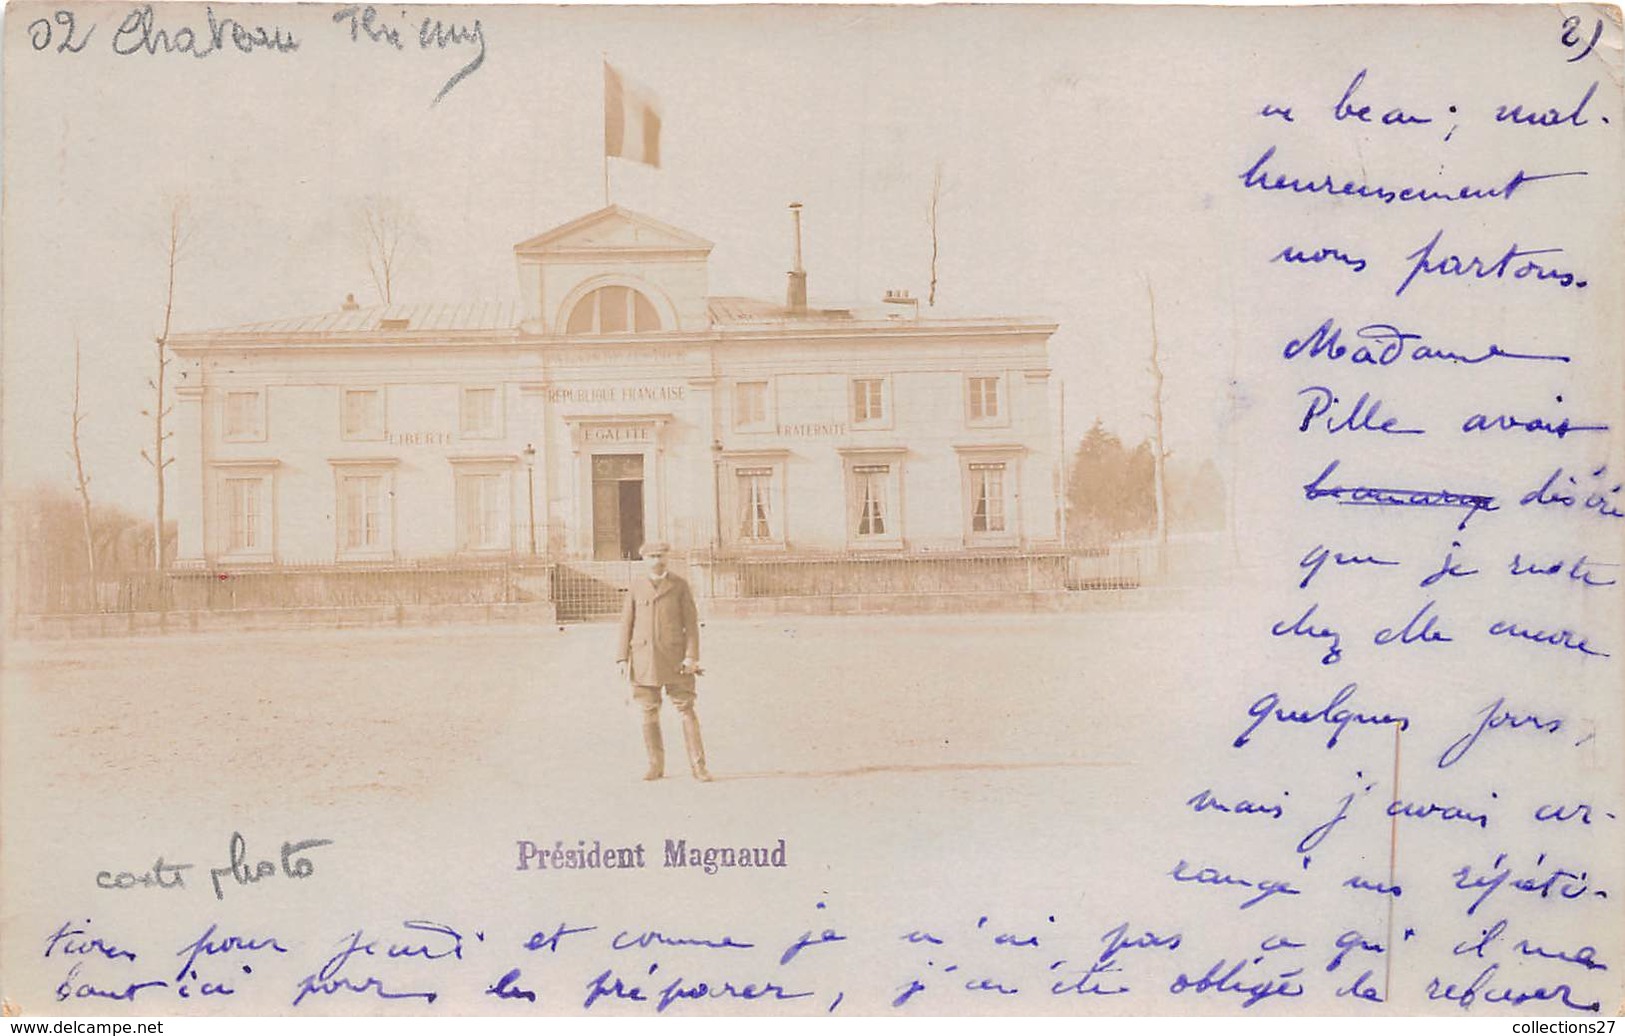 02-CHATEAU-THIERRY- CARTE-PHOTO6 PRESIDENT MAGNAUD - Chateau Thierry